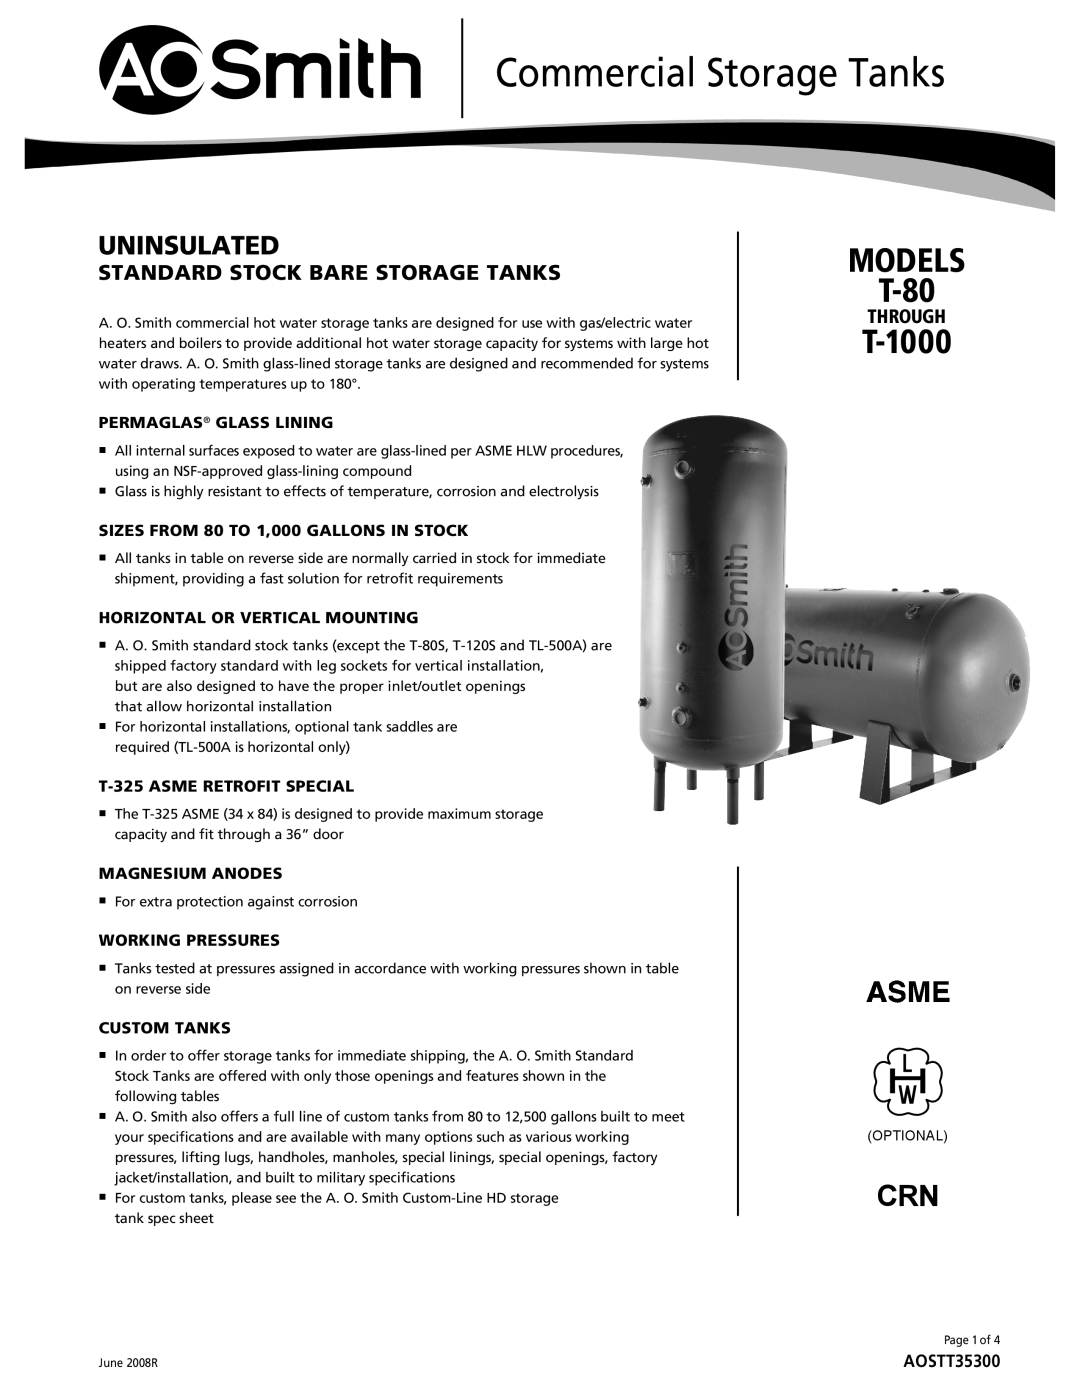 A.O. Smith T-80 through T-1000 specifications Commercial Storage Tanks, Uninsulated, Standard Stock Bare Storage Tanks 